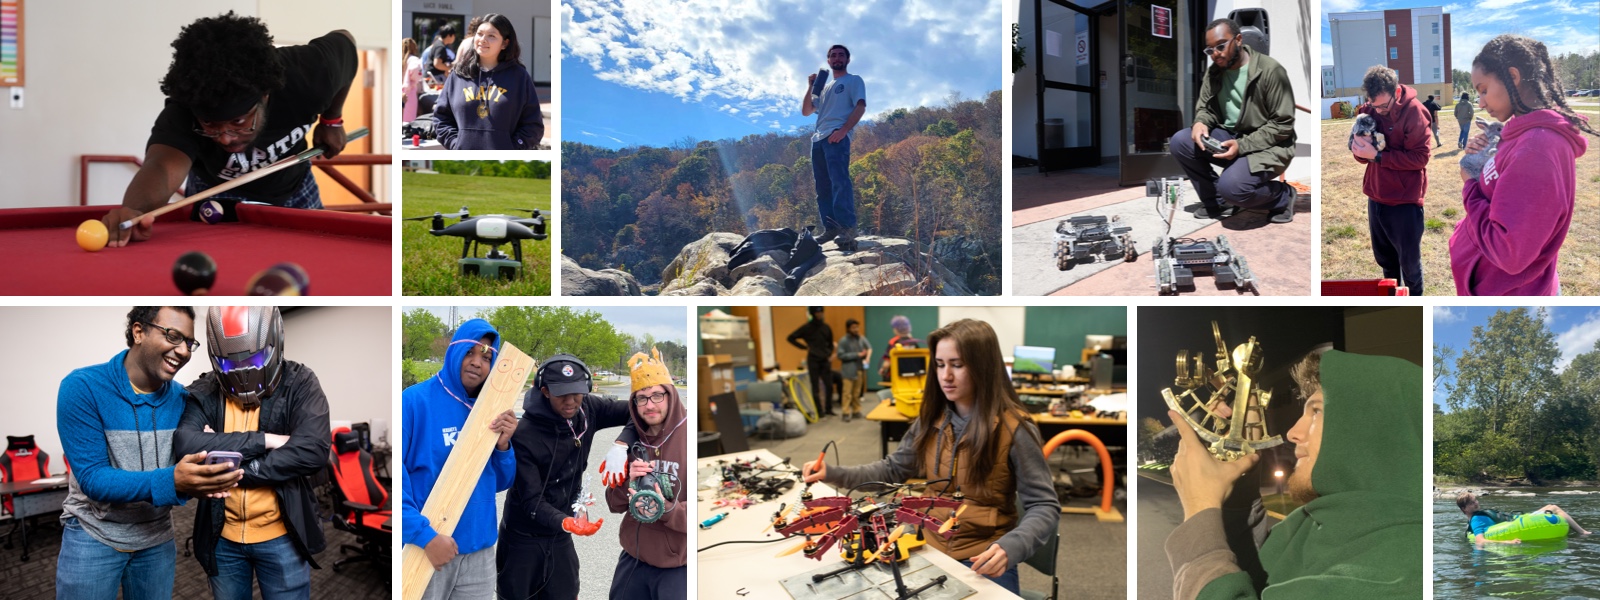 Collage of student photos from activities on campus